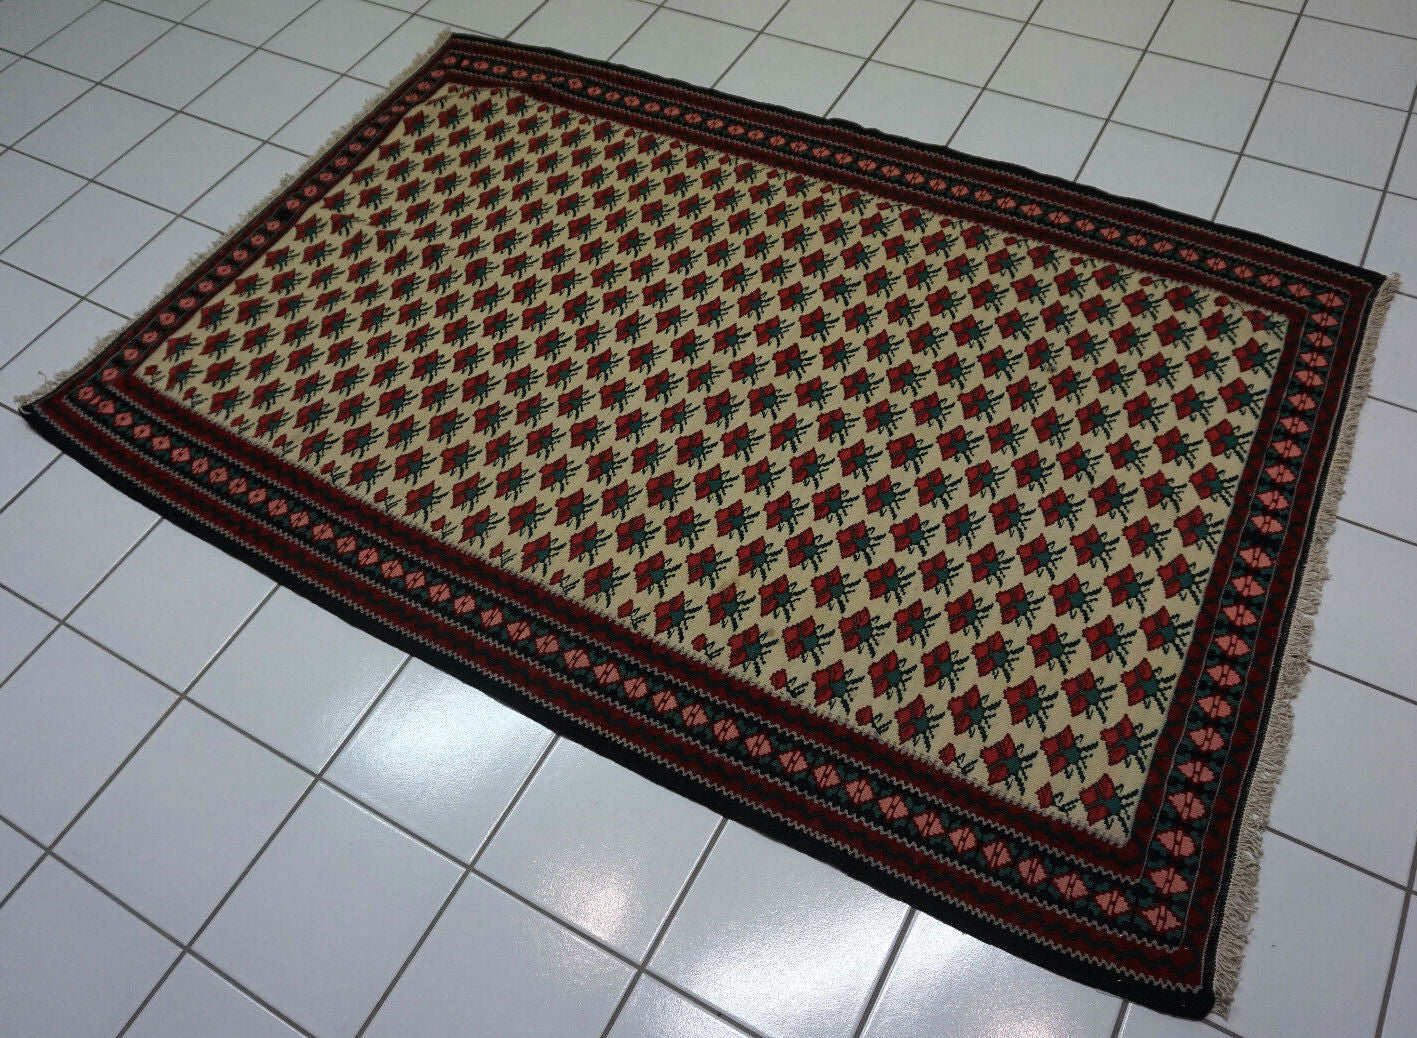 Handmade Vintage Persian Ardabil Kilim with classic design in beige, red, green, and black colors